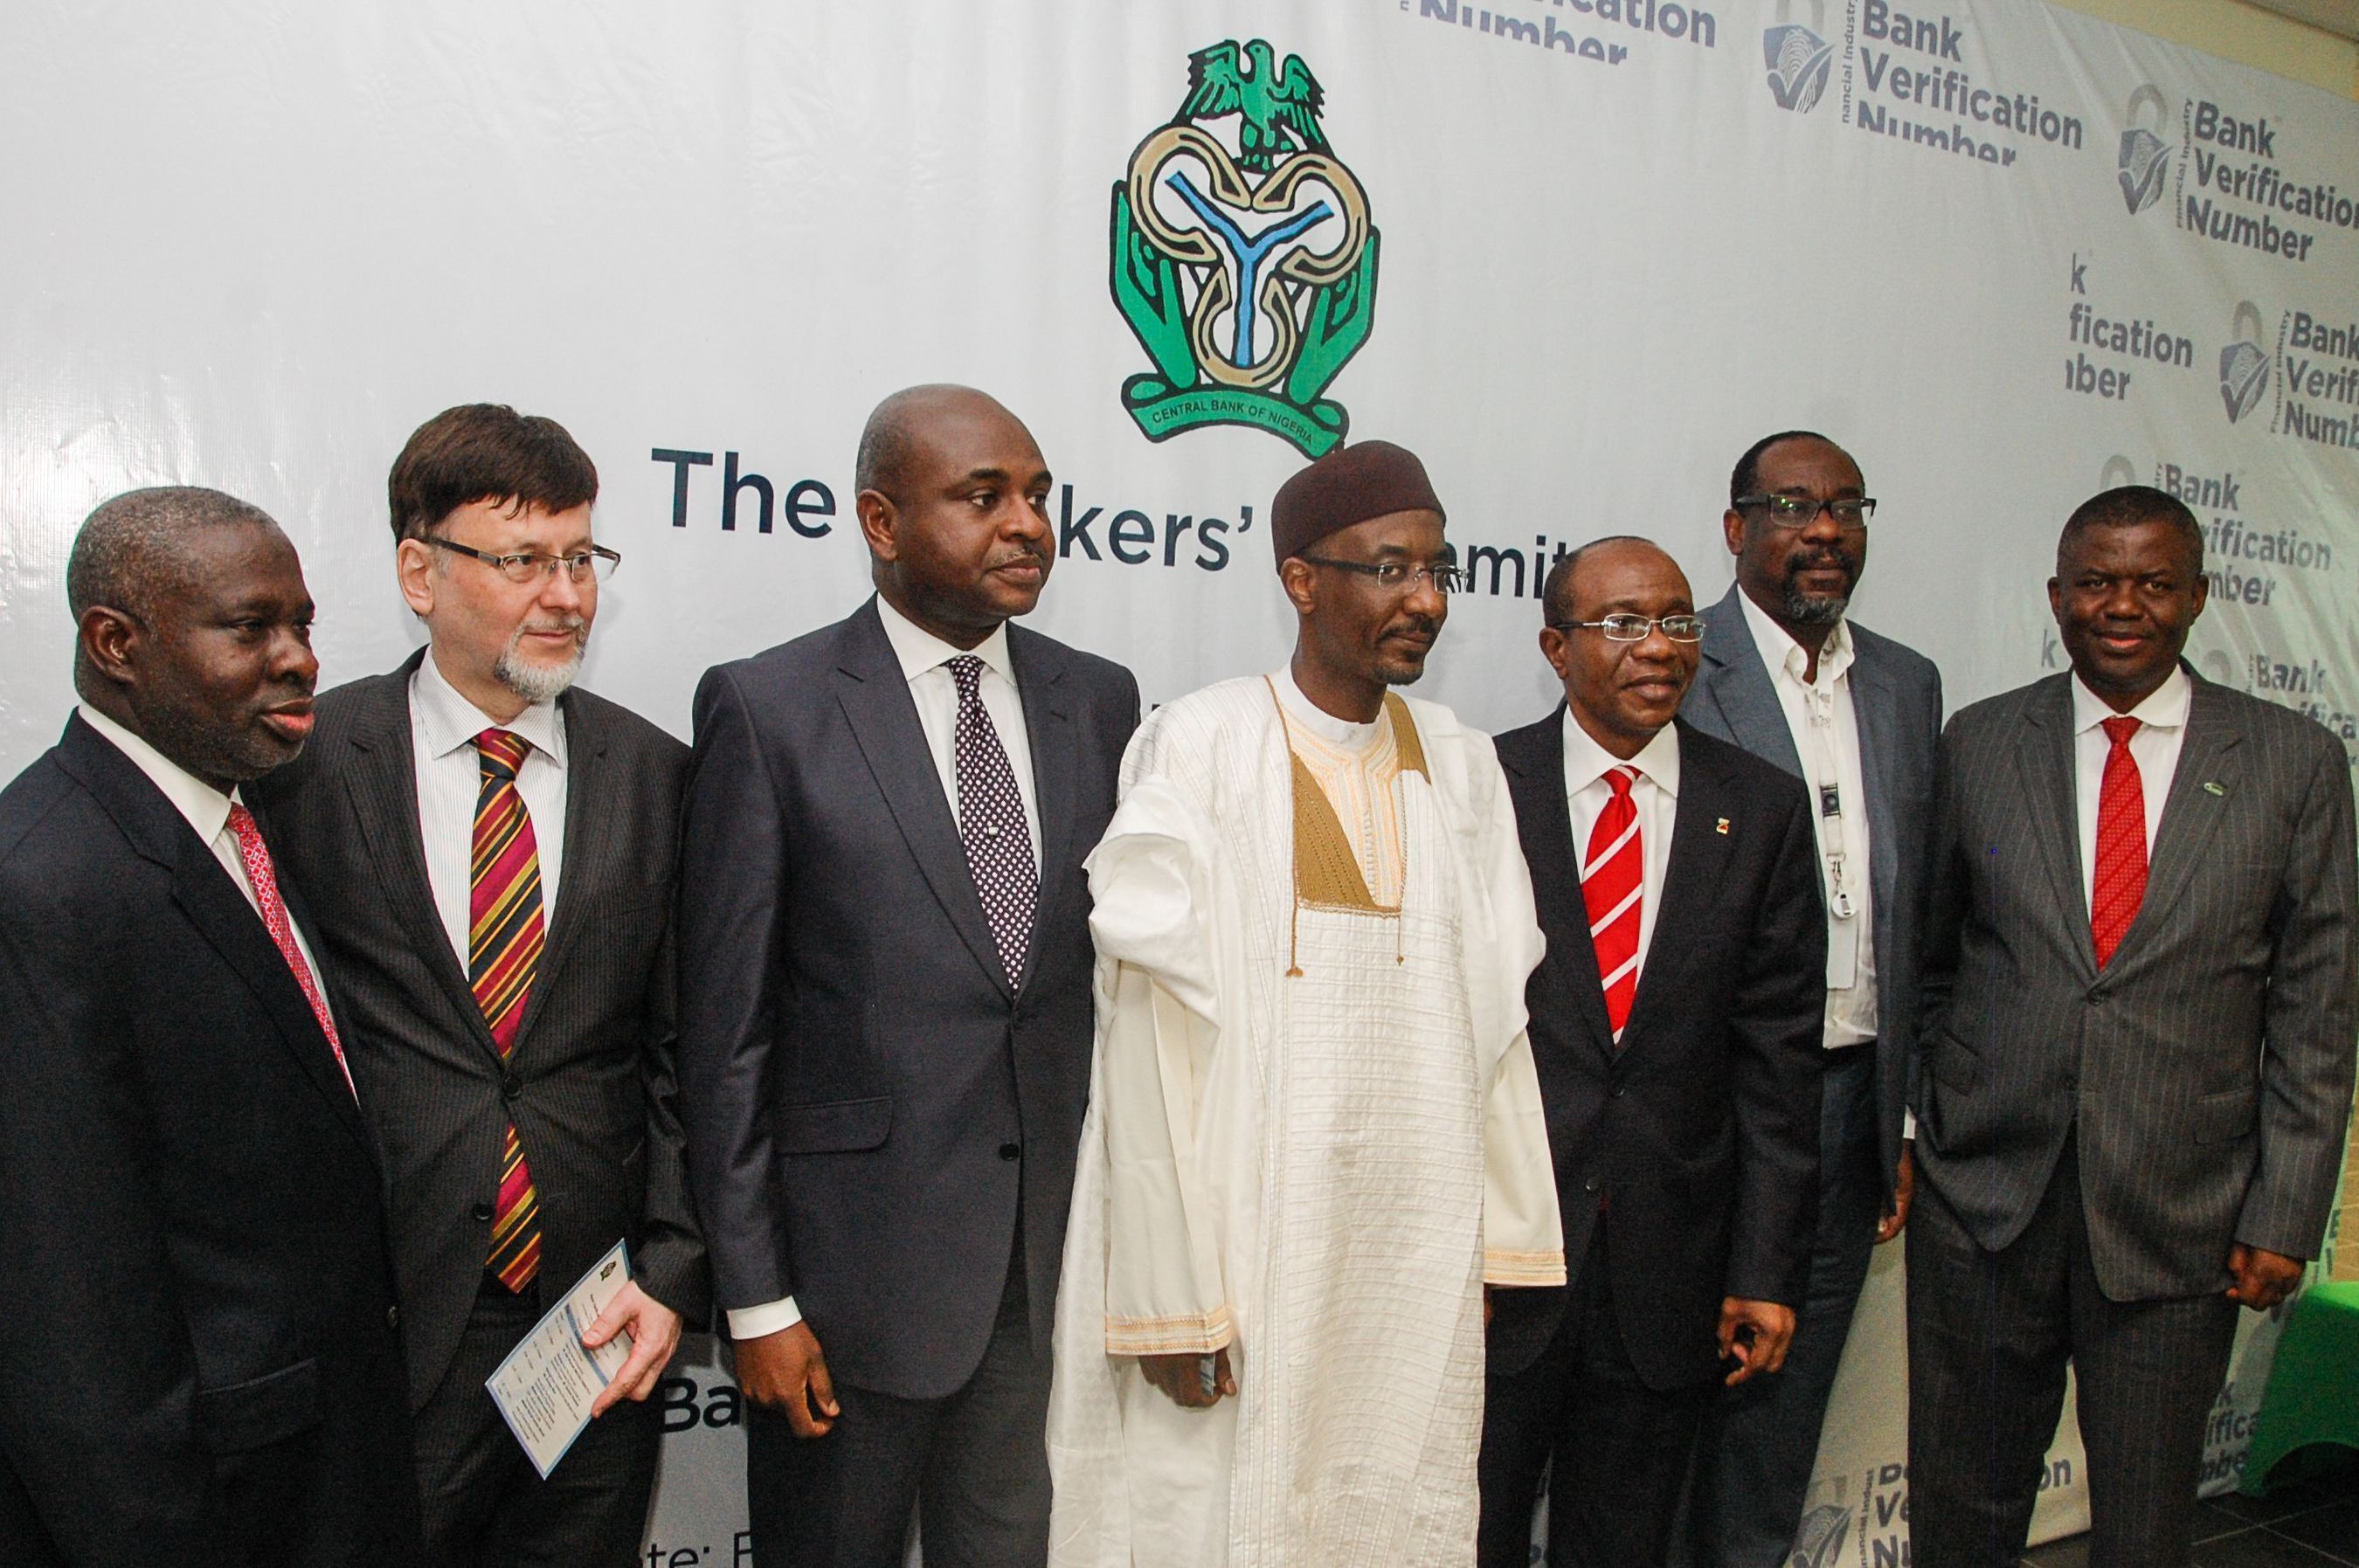 Group photo at the opening ceremony of the DERMALOG biometric system for Nigeria's banks - including the Governor of the Central Bank, Sanusi Lamido Sanusi (centre), and the CEO of DERMALOG, GÃ¼nther Mull (second from left). (PRNewsFoto/DERMALOG Identification Systems)